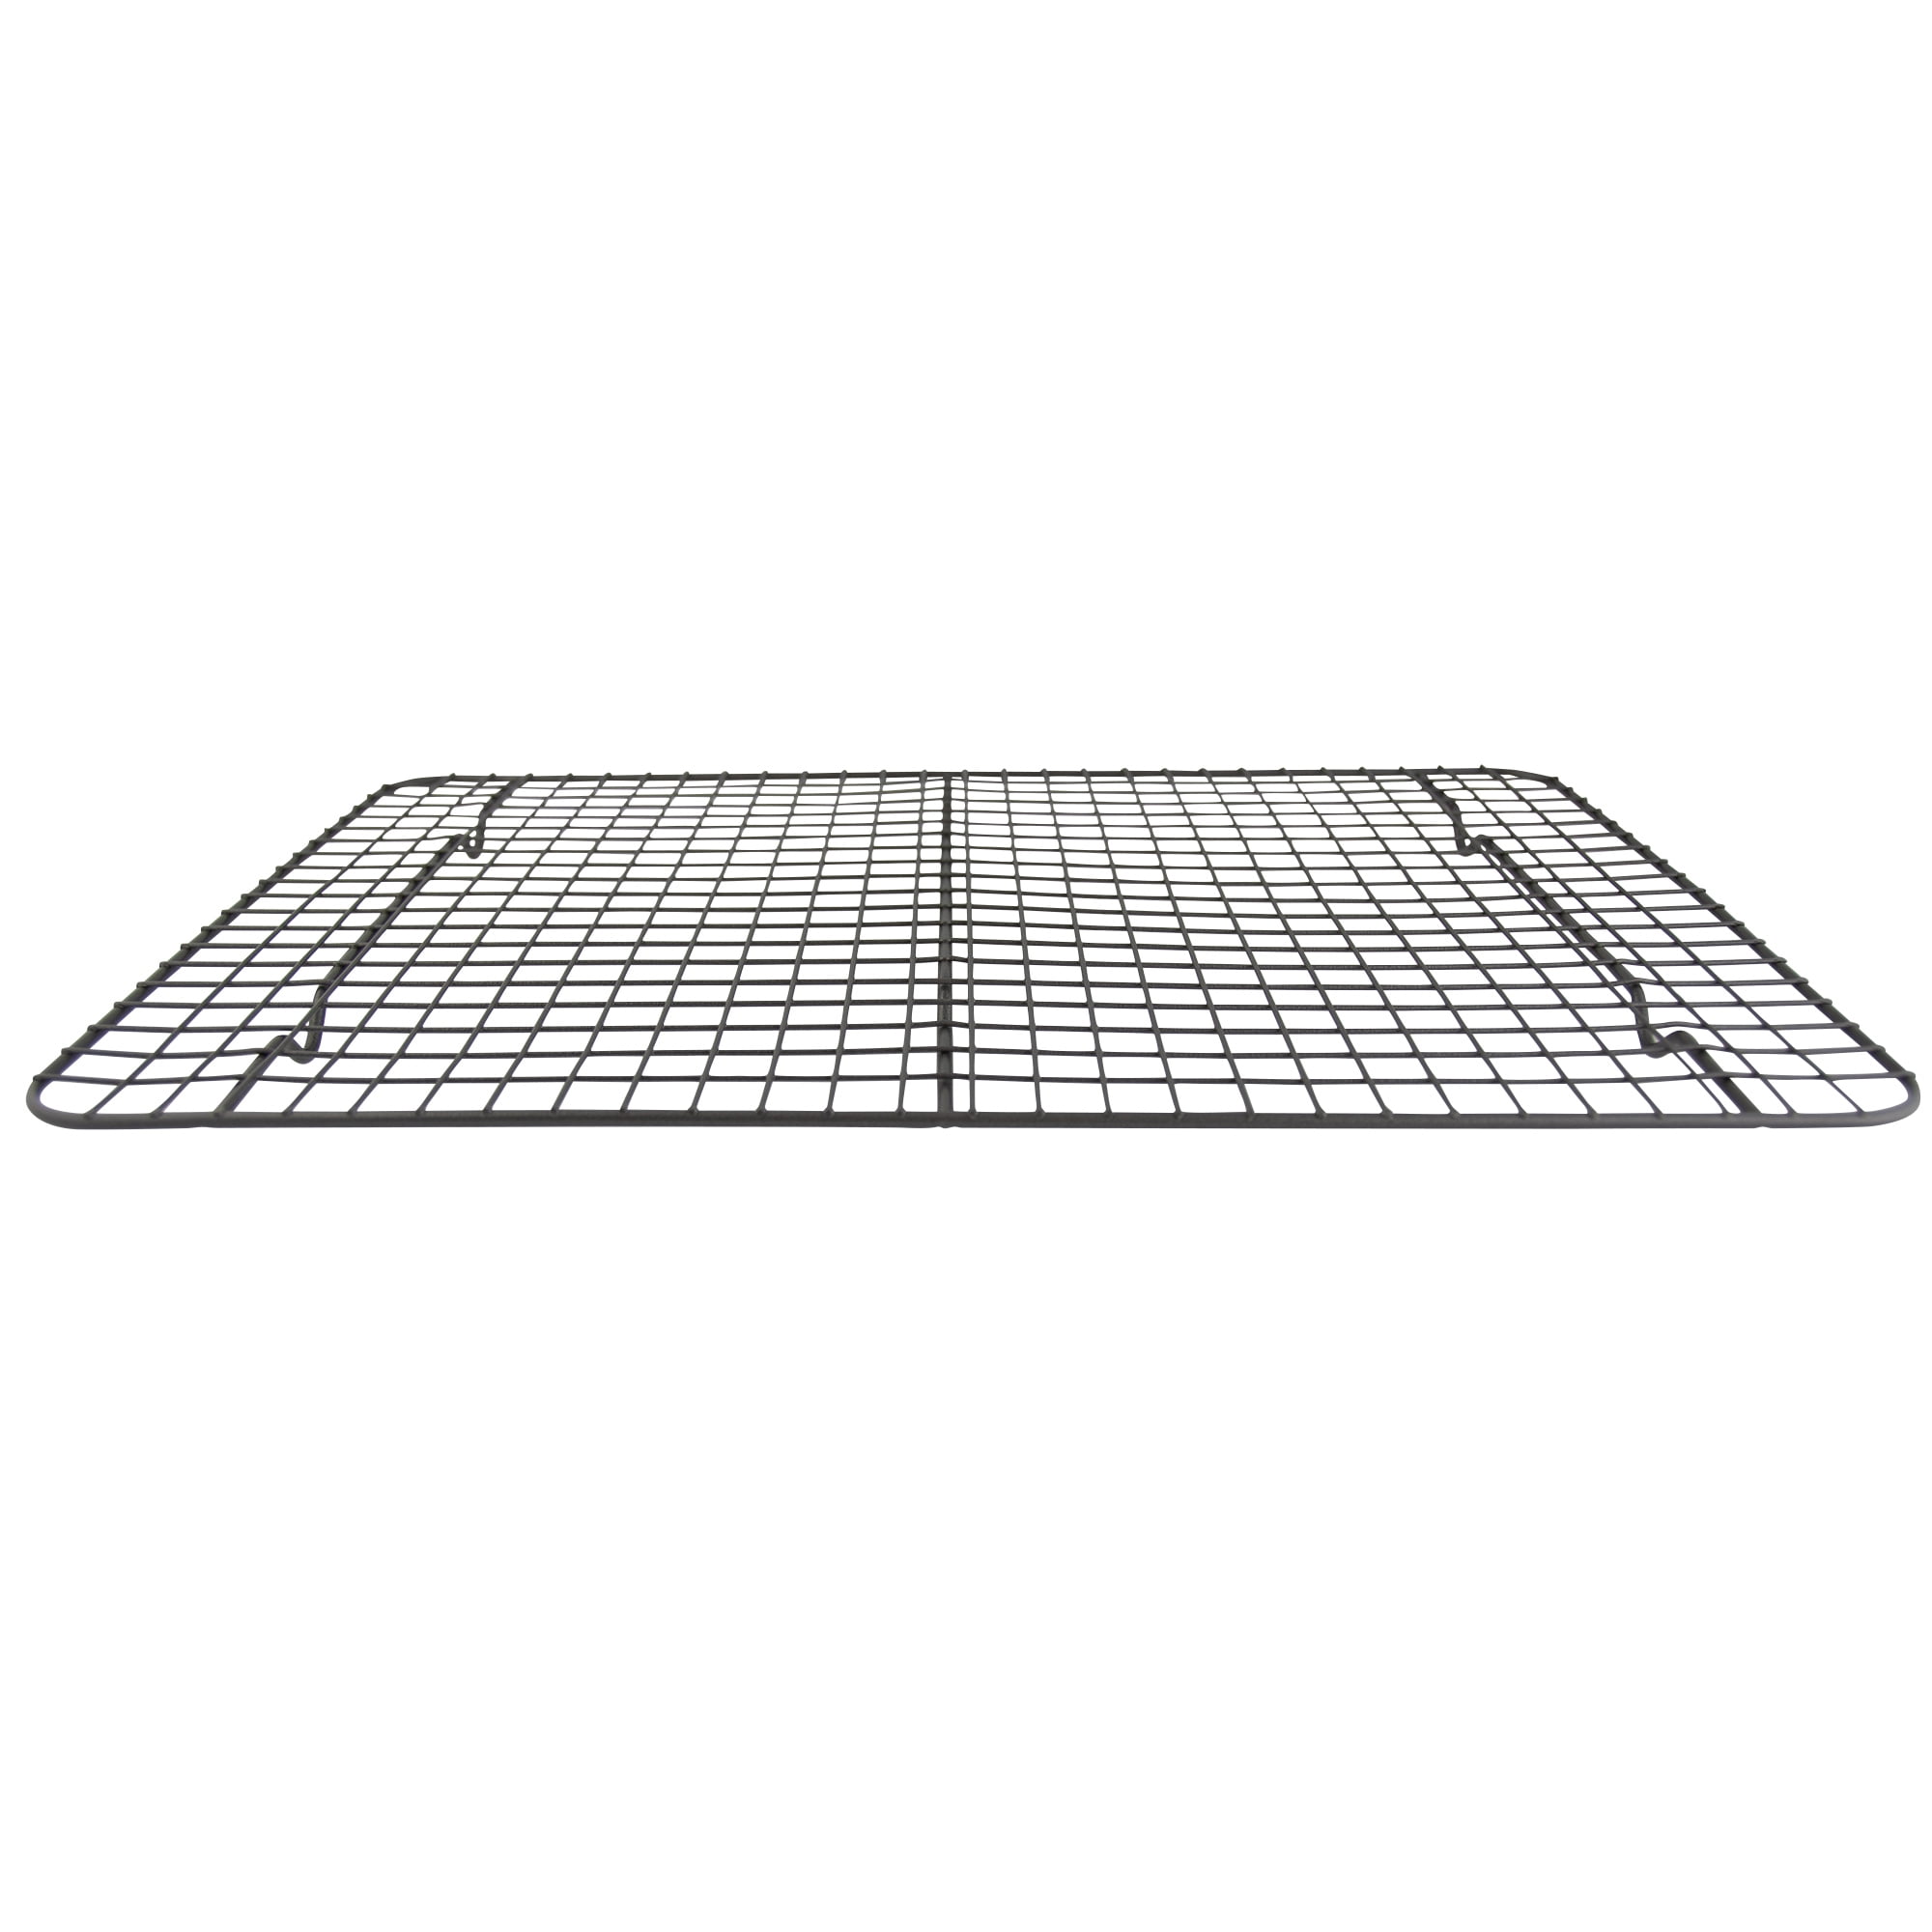 Taste of Home 18x13-Inch Baking Sheet with 17.5x12.5-Inch Non-Stick Cooling Rack